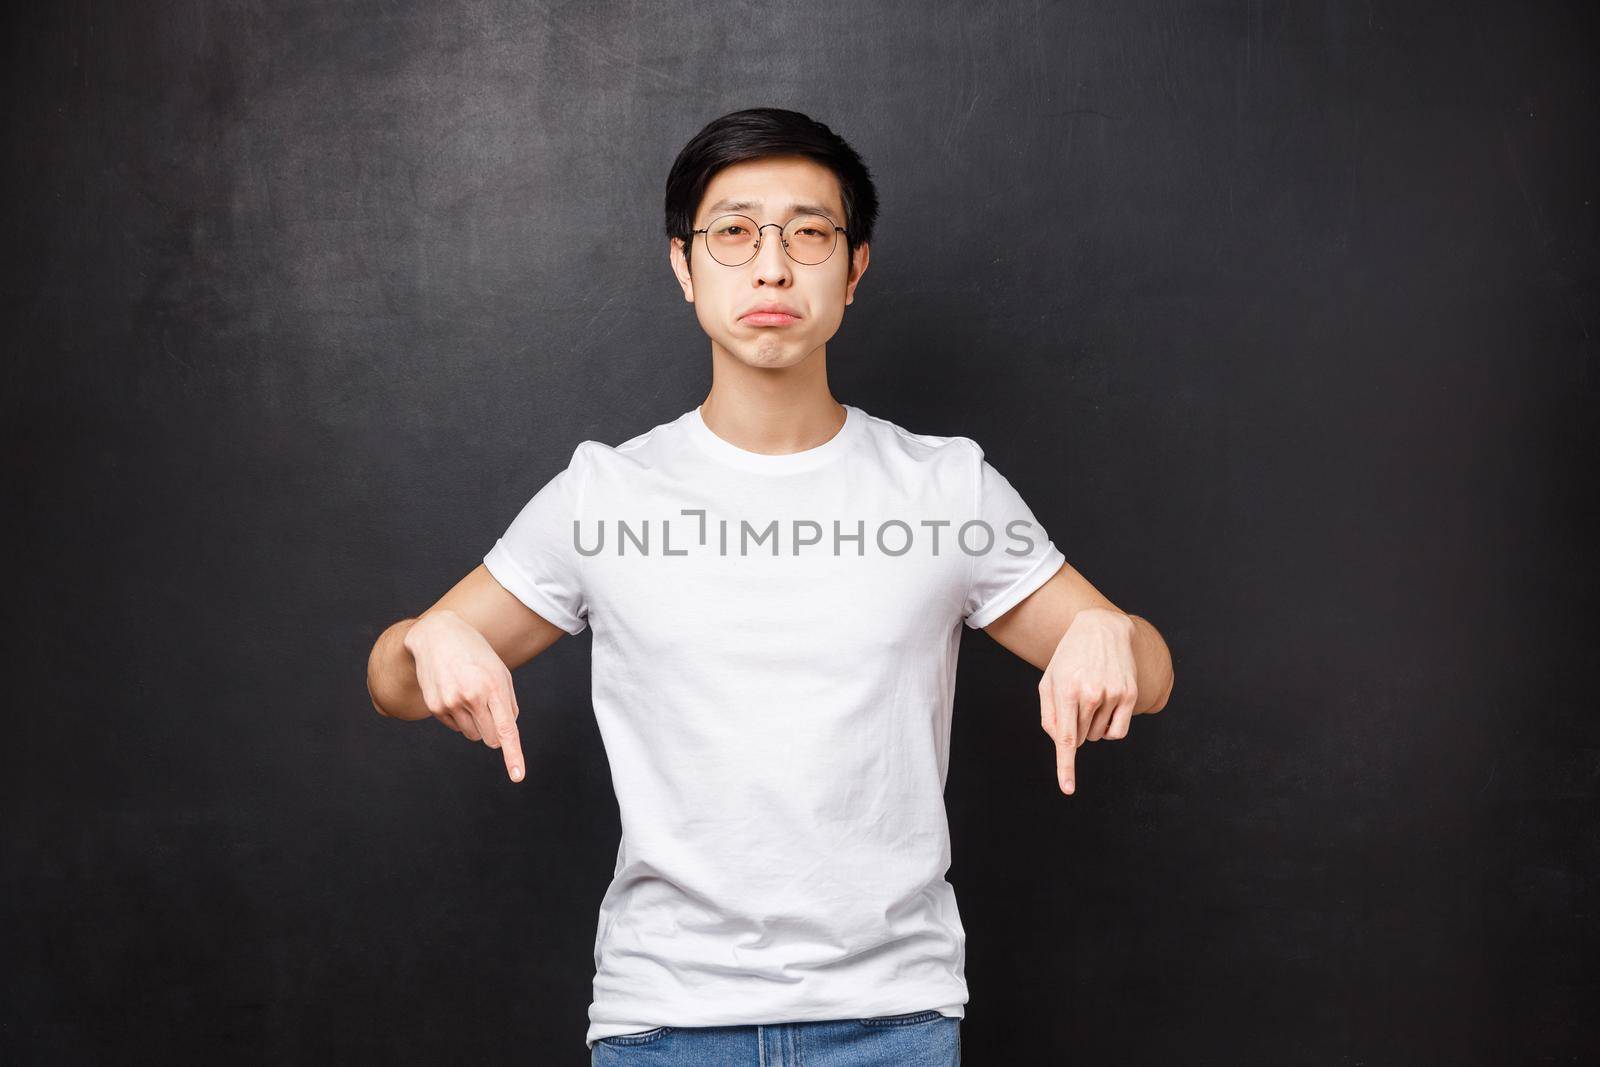 Miserable and gloomy upset cute asian guy sobbing look at camera with regret and sadness, pointing fingers down at something broken or upsetting, feel uneasy, black background.